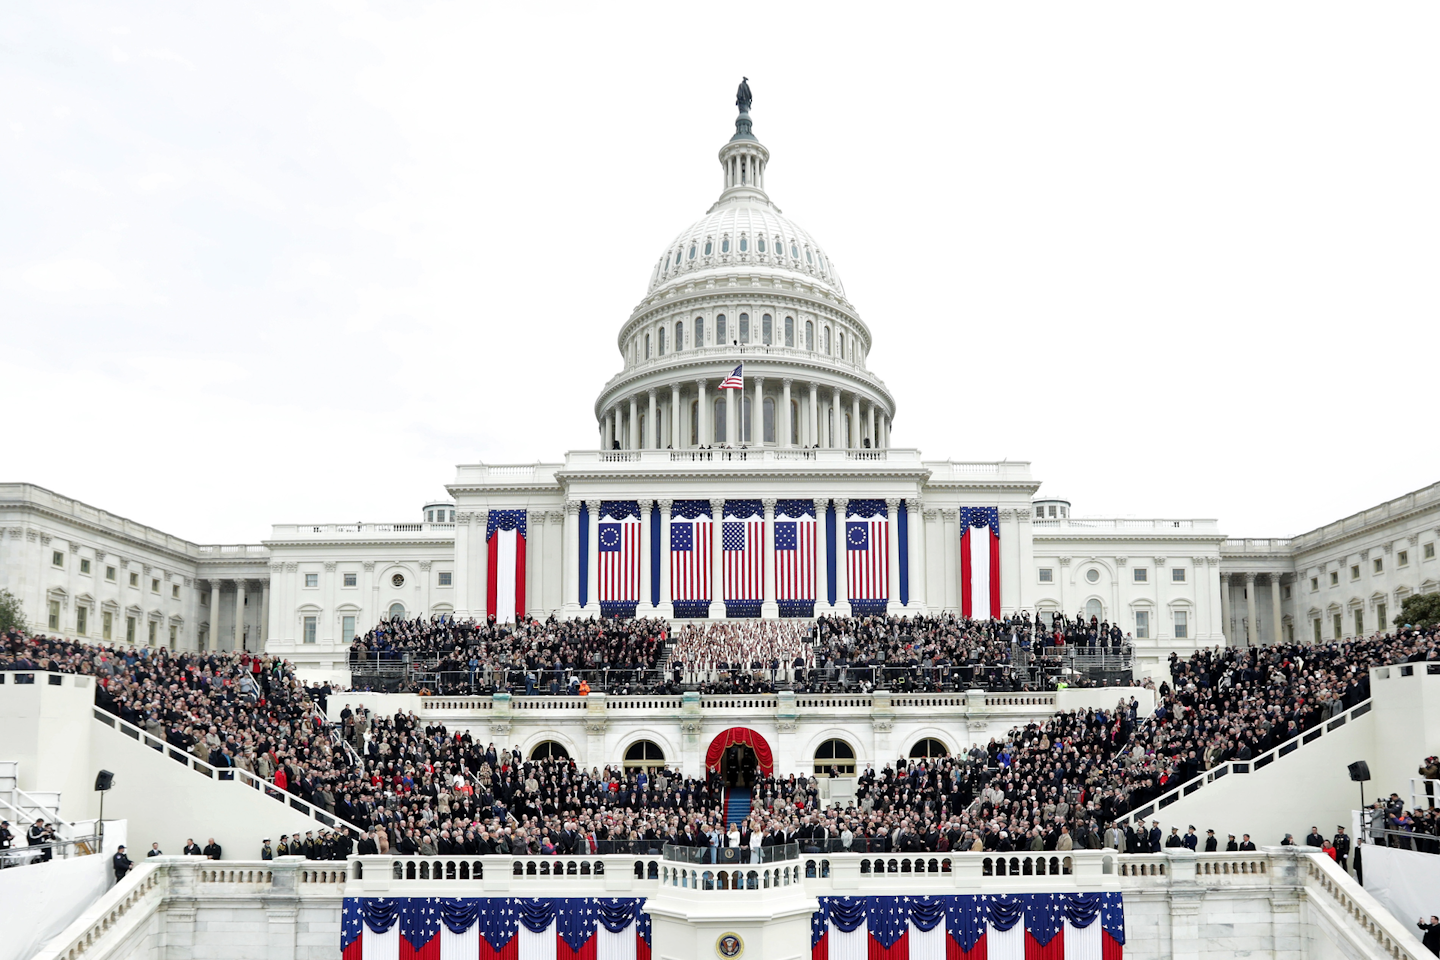 The 58th presidential inauguration took place on the steps of the U.S. Capitol in 2017, when Donald Trump was sworn in as president. This year, event planner Andrew Roby says he would keep that ceremony on the Capitol steps, but significantly reduce the number of guests in attendance.